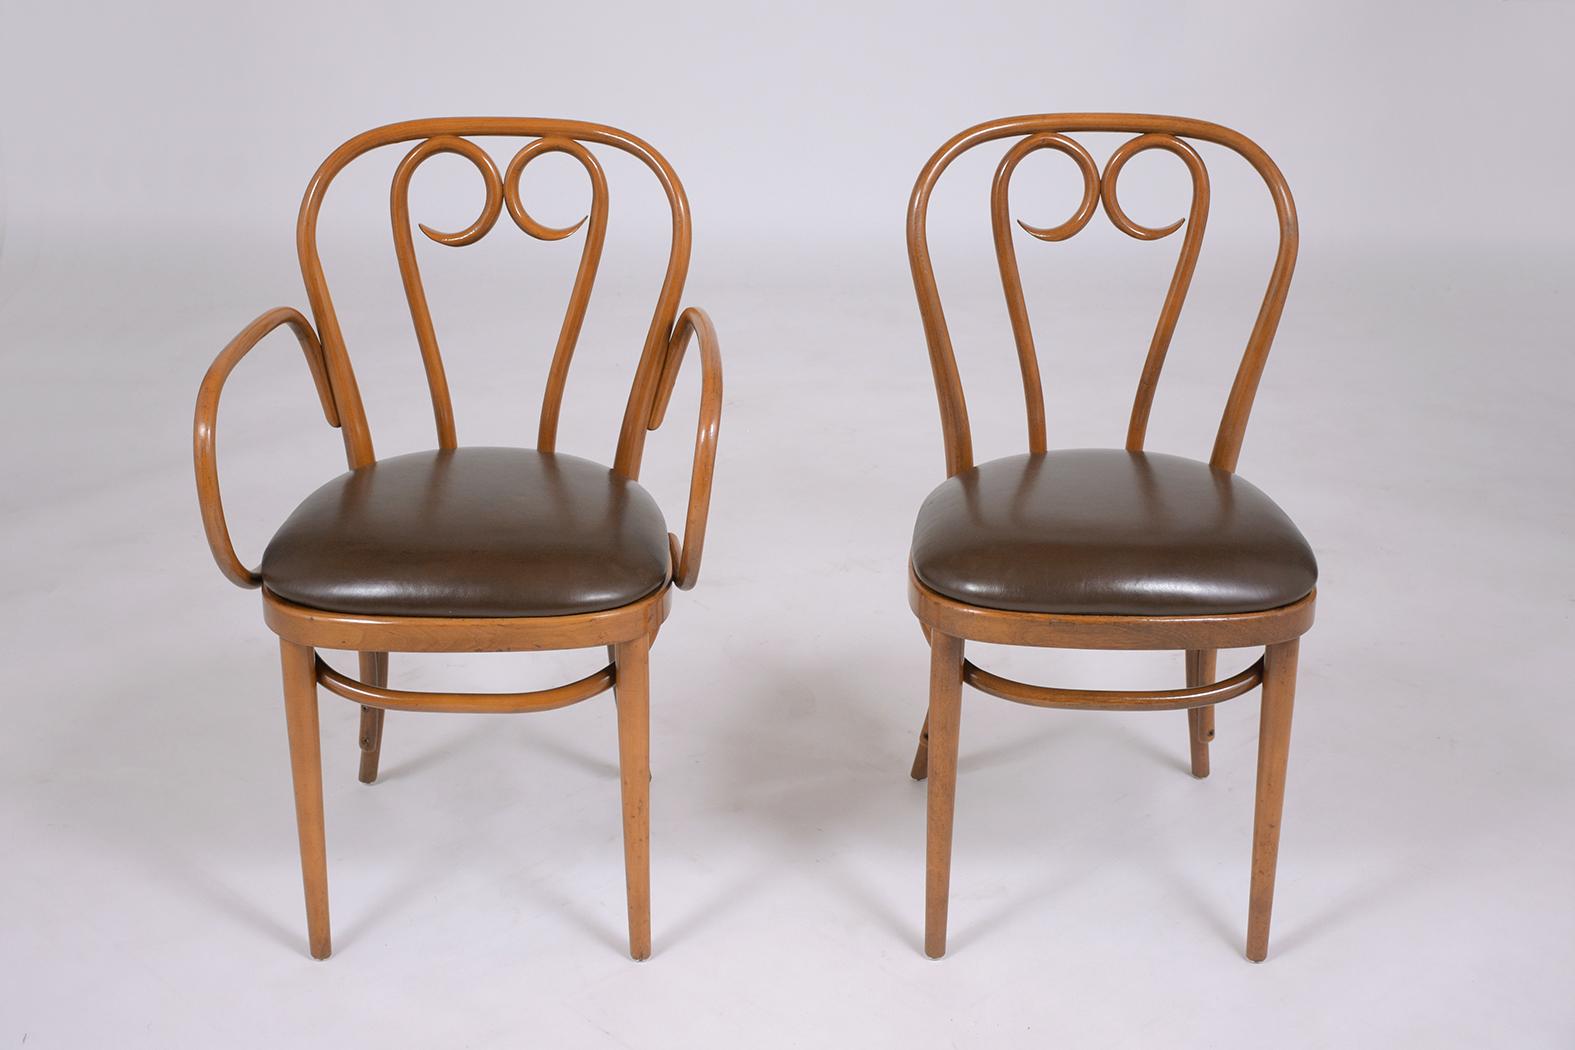 Carved Art-Deco Thonet Bentwood Leather Dining Chairs with Walnut Finish - Set of Six For Sale